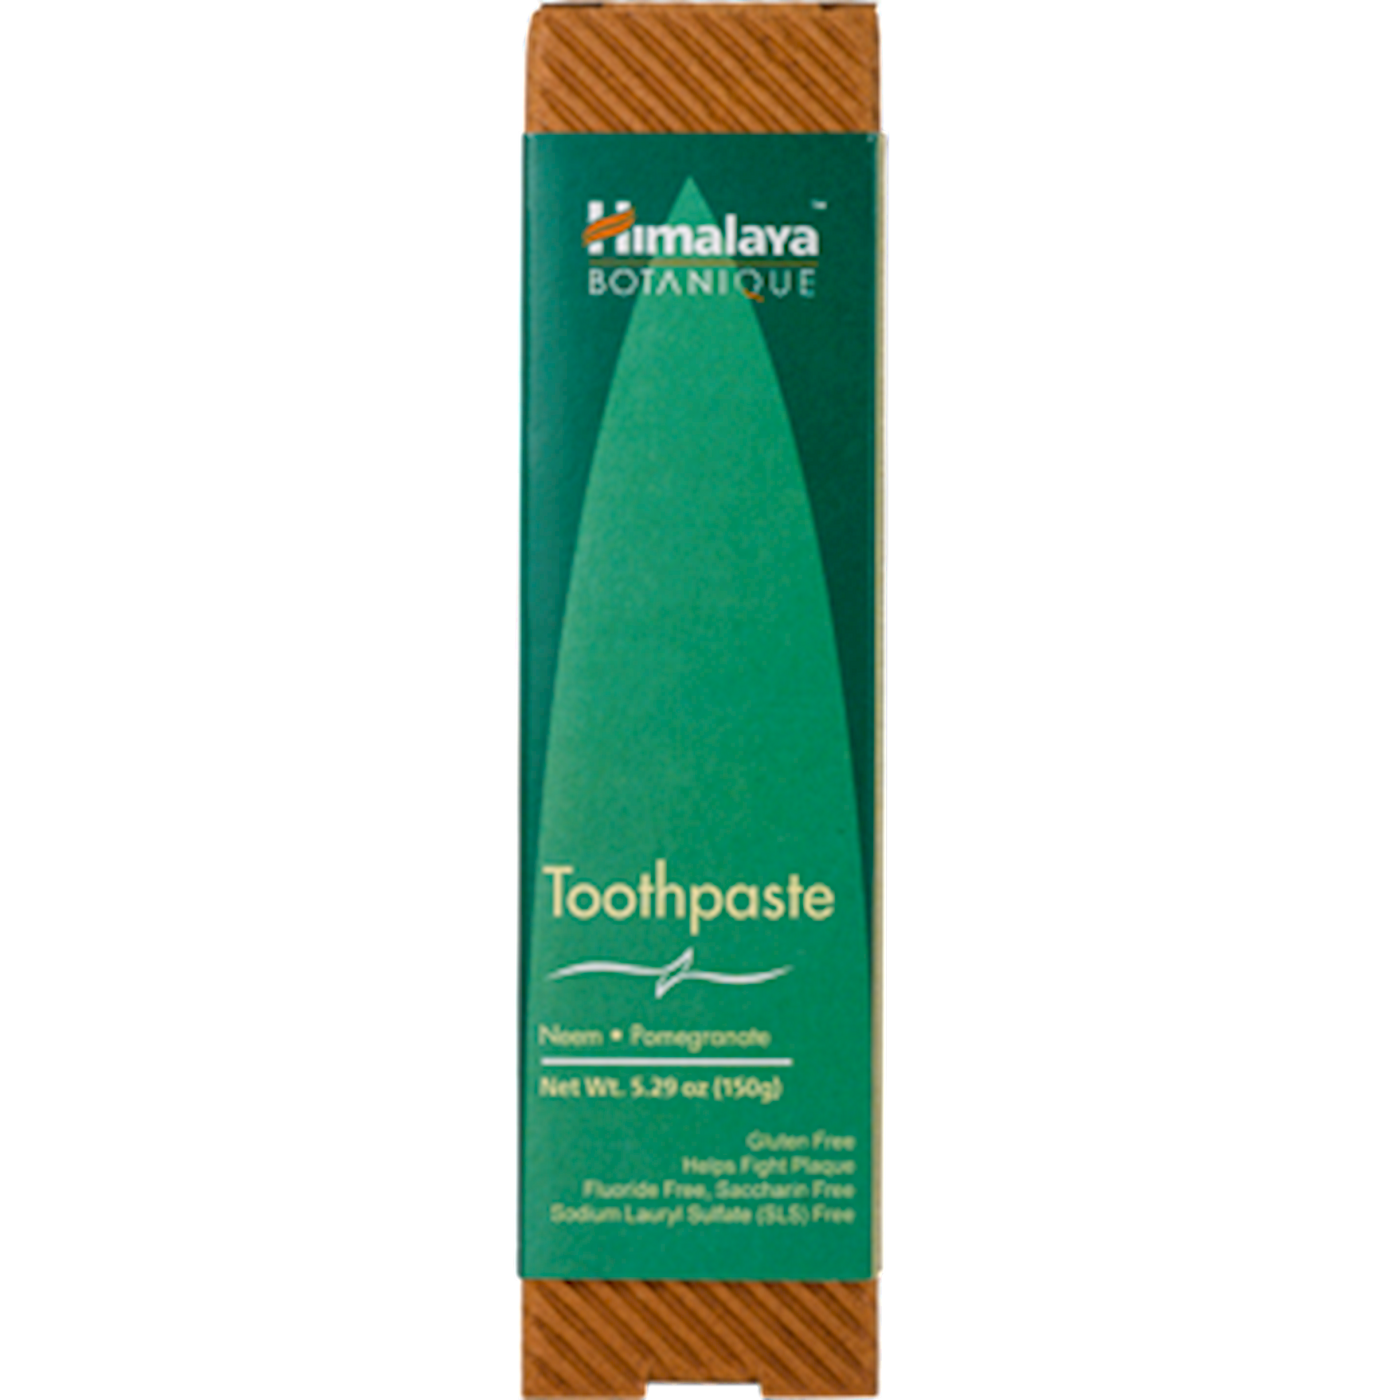 Neem & Pomegranate Toothpaste 150gm Curated Wellness